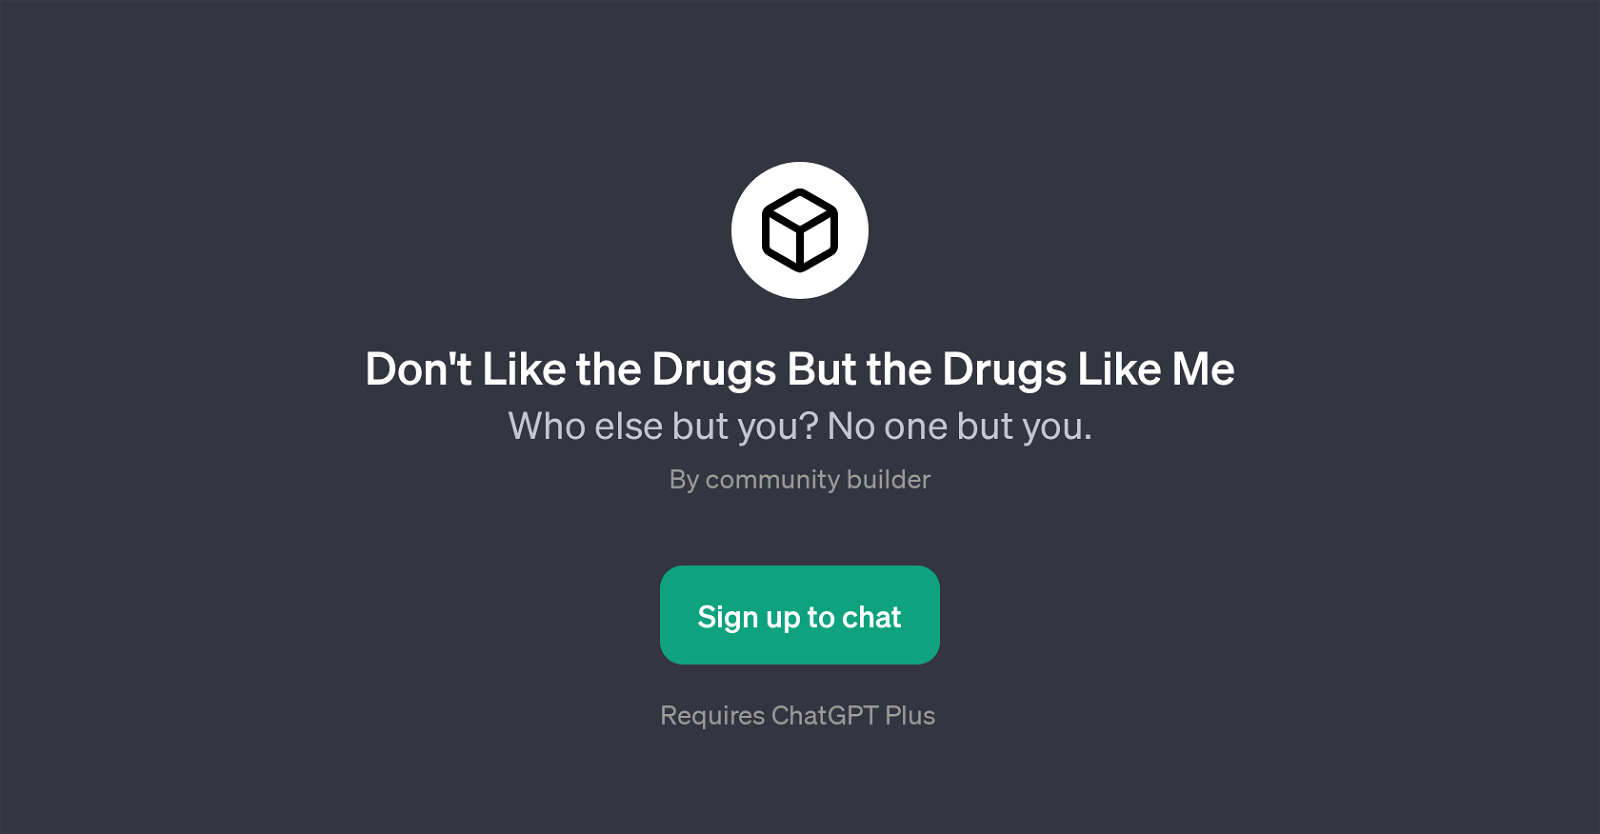 Don't Like the Drugs But the Drugs Like Me GPT website